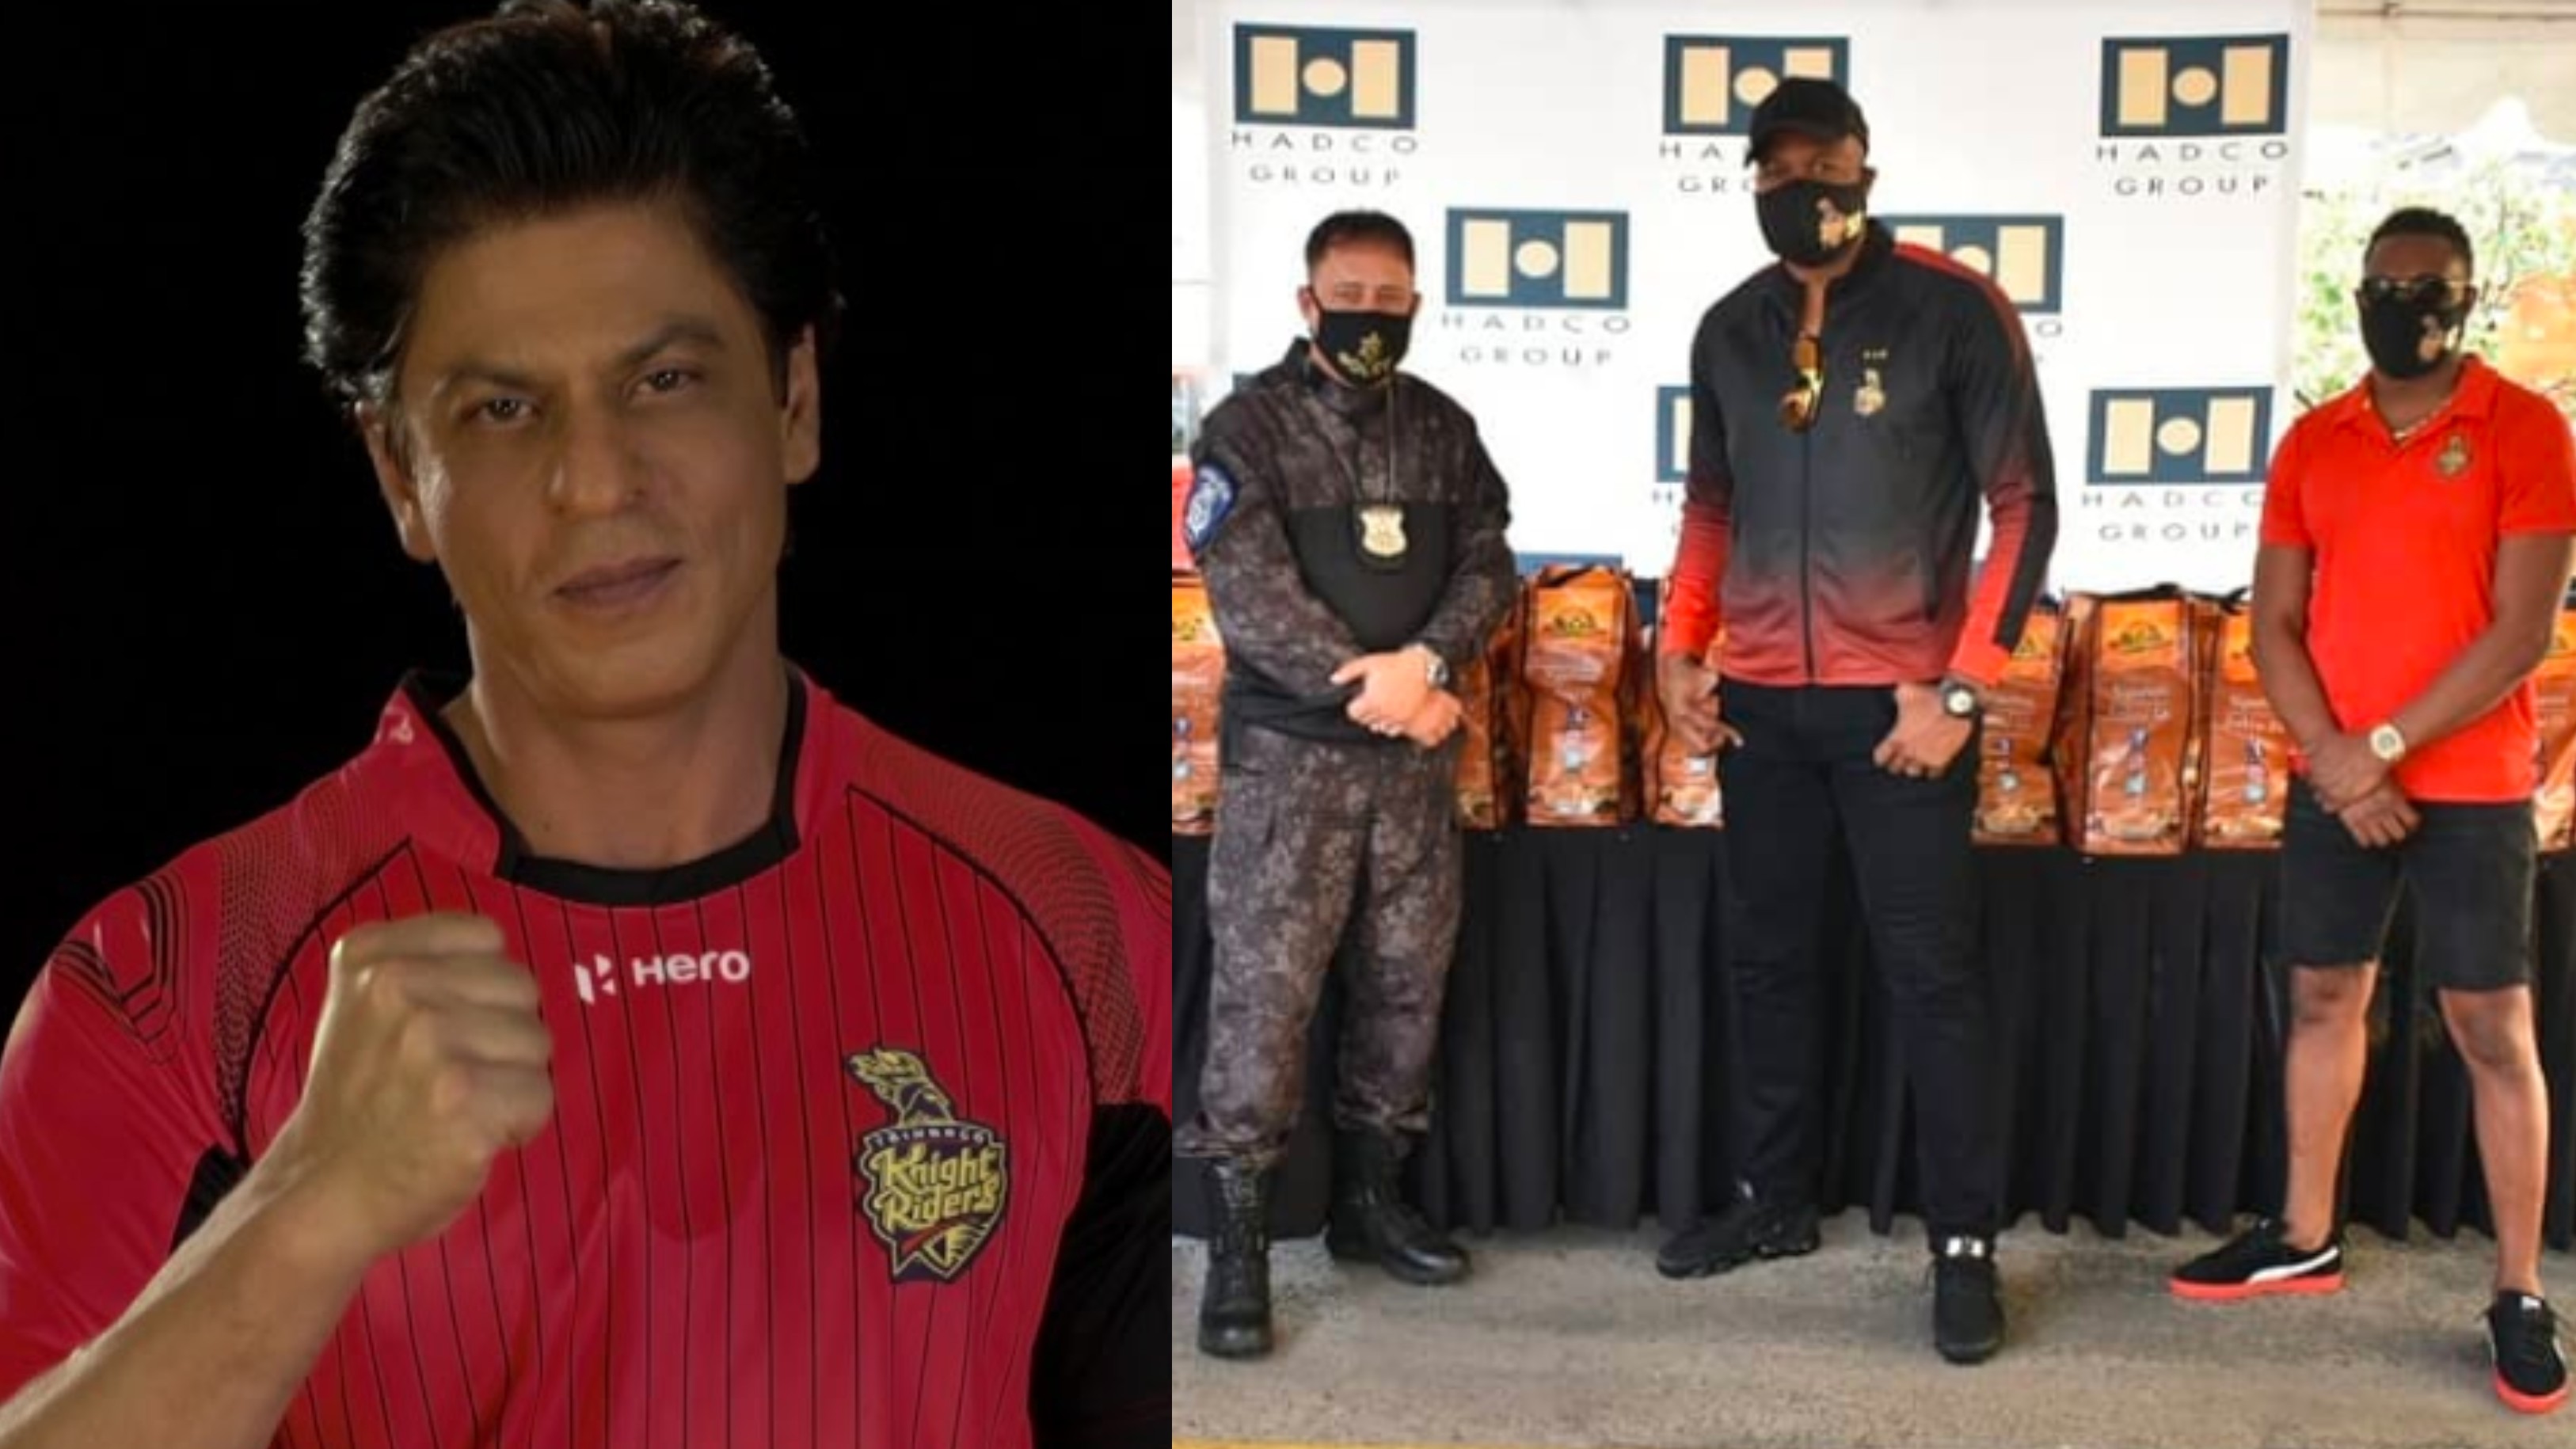 Shah Rukh Khan-owned TKR help the needy with food hampers across Trinidad & Tobago amid COVID-19 crisis